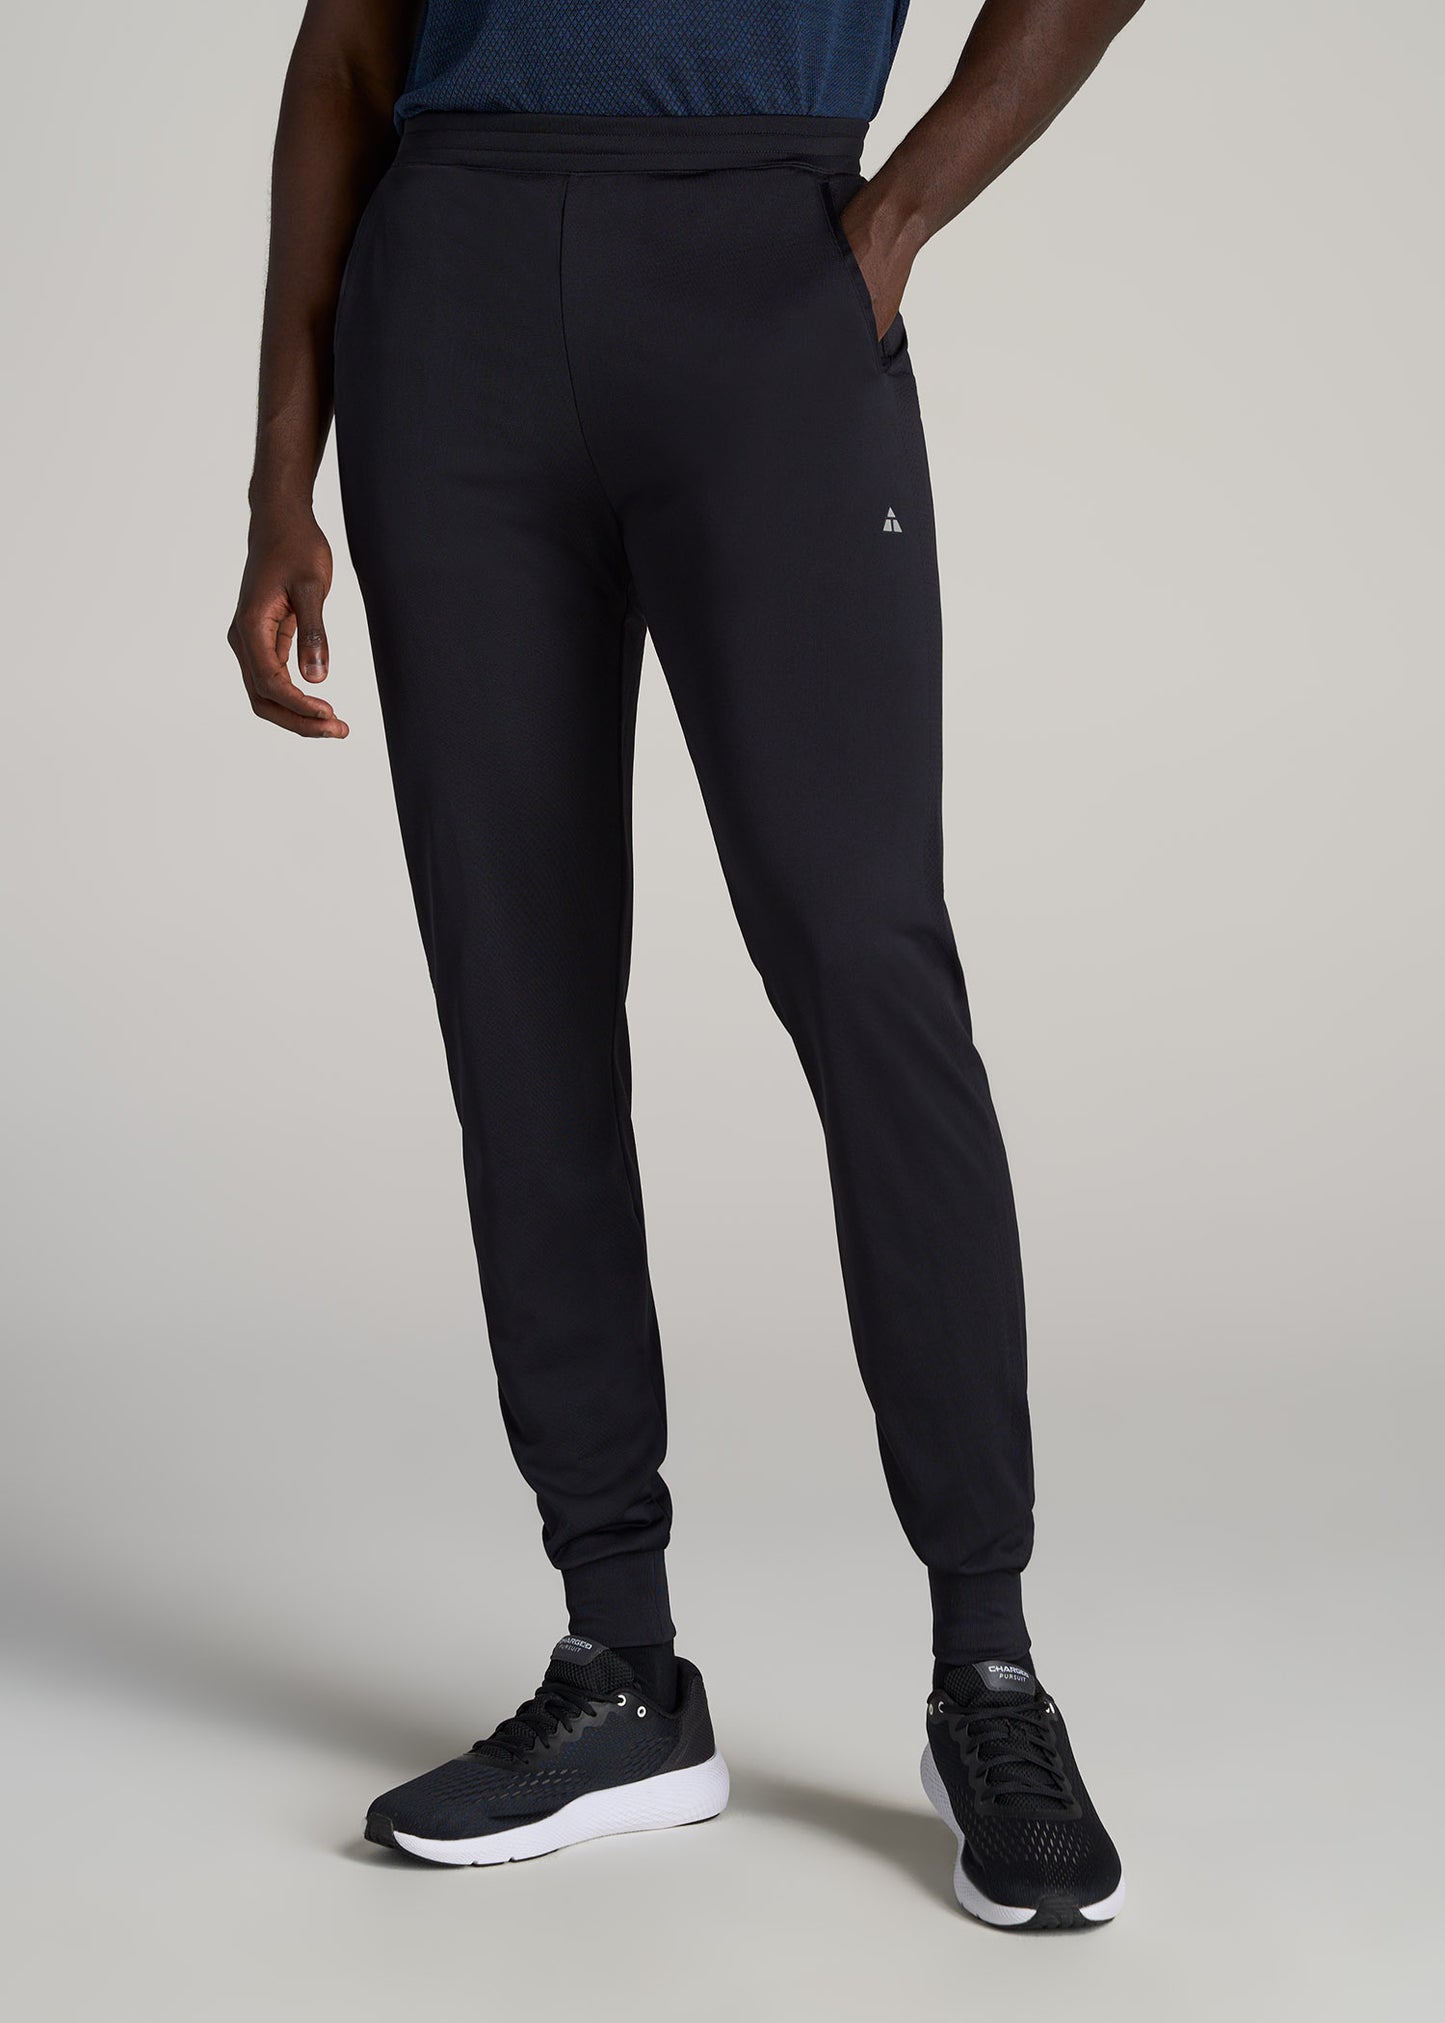 AT PERFORMANCE ENGINEERED JOGGERS FOR TALL MEN IN BLACK